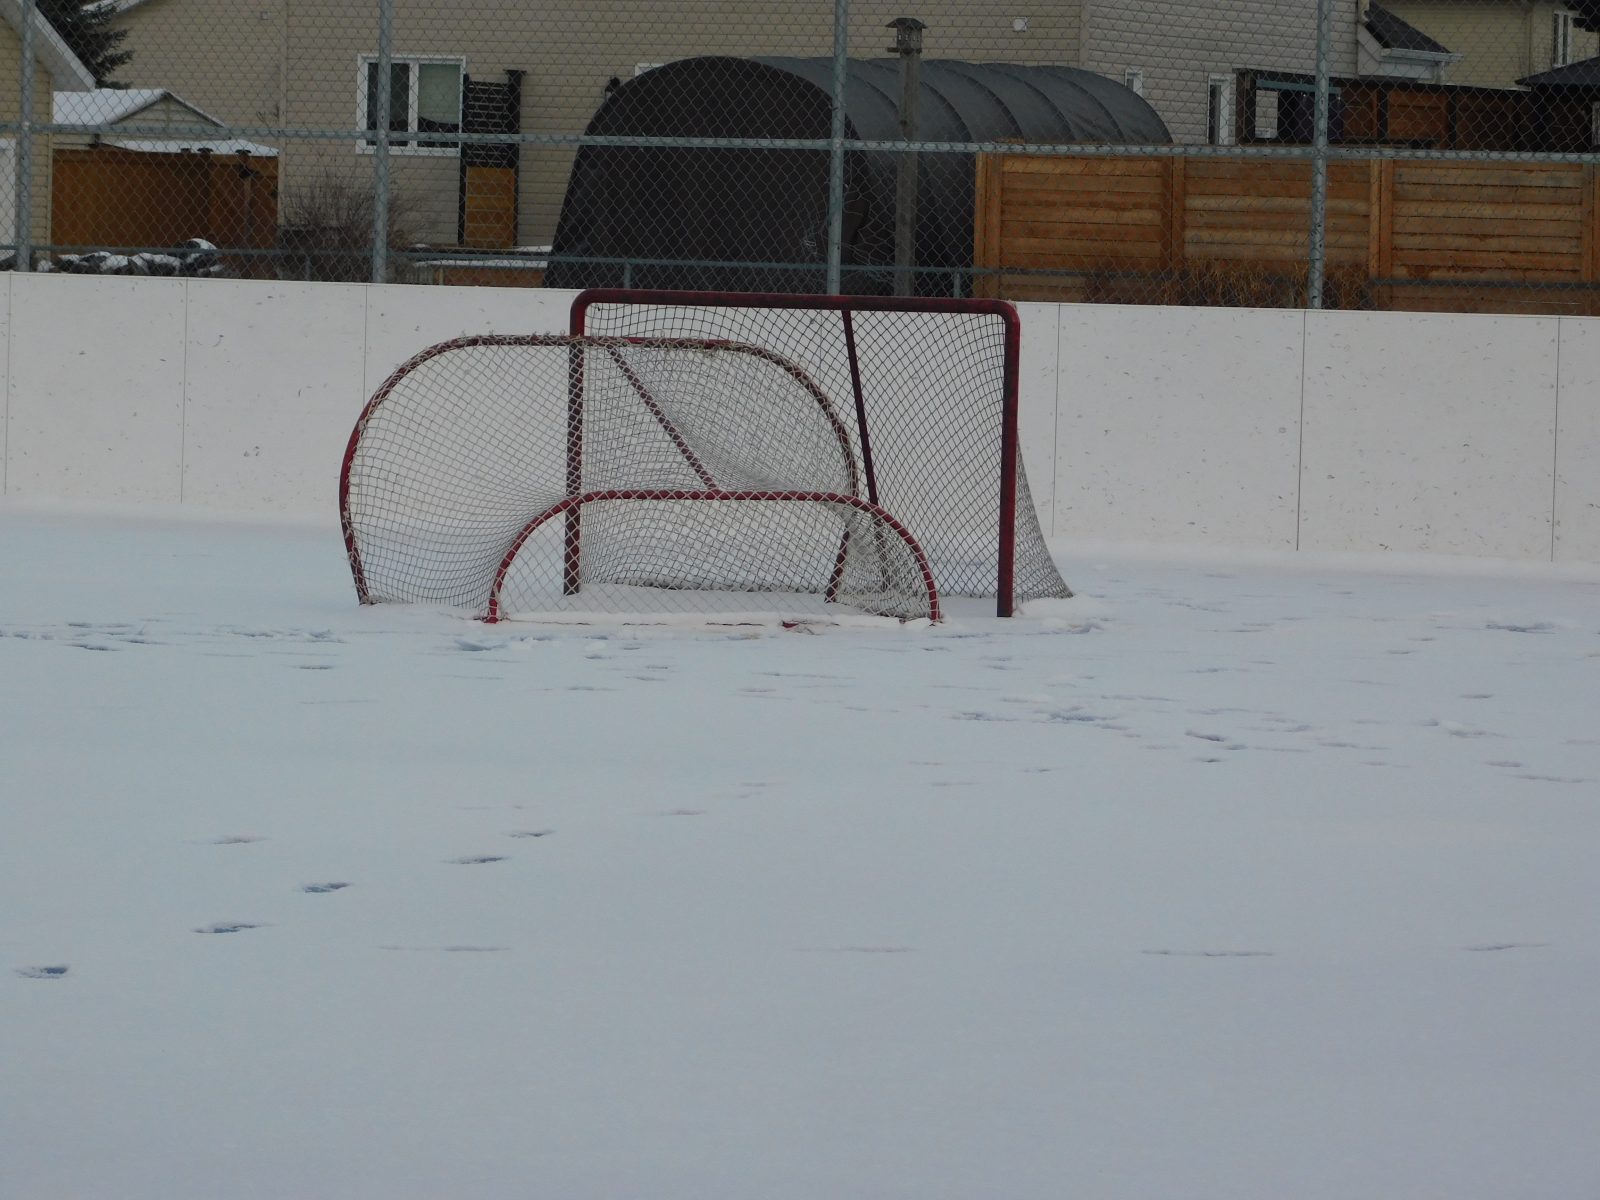 More measures for outdoor rinks